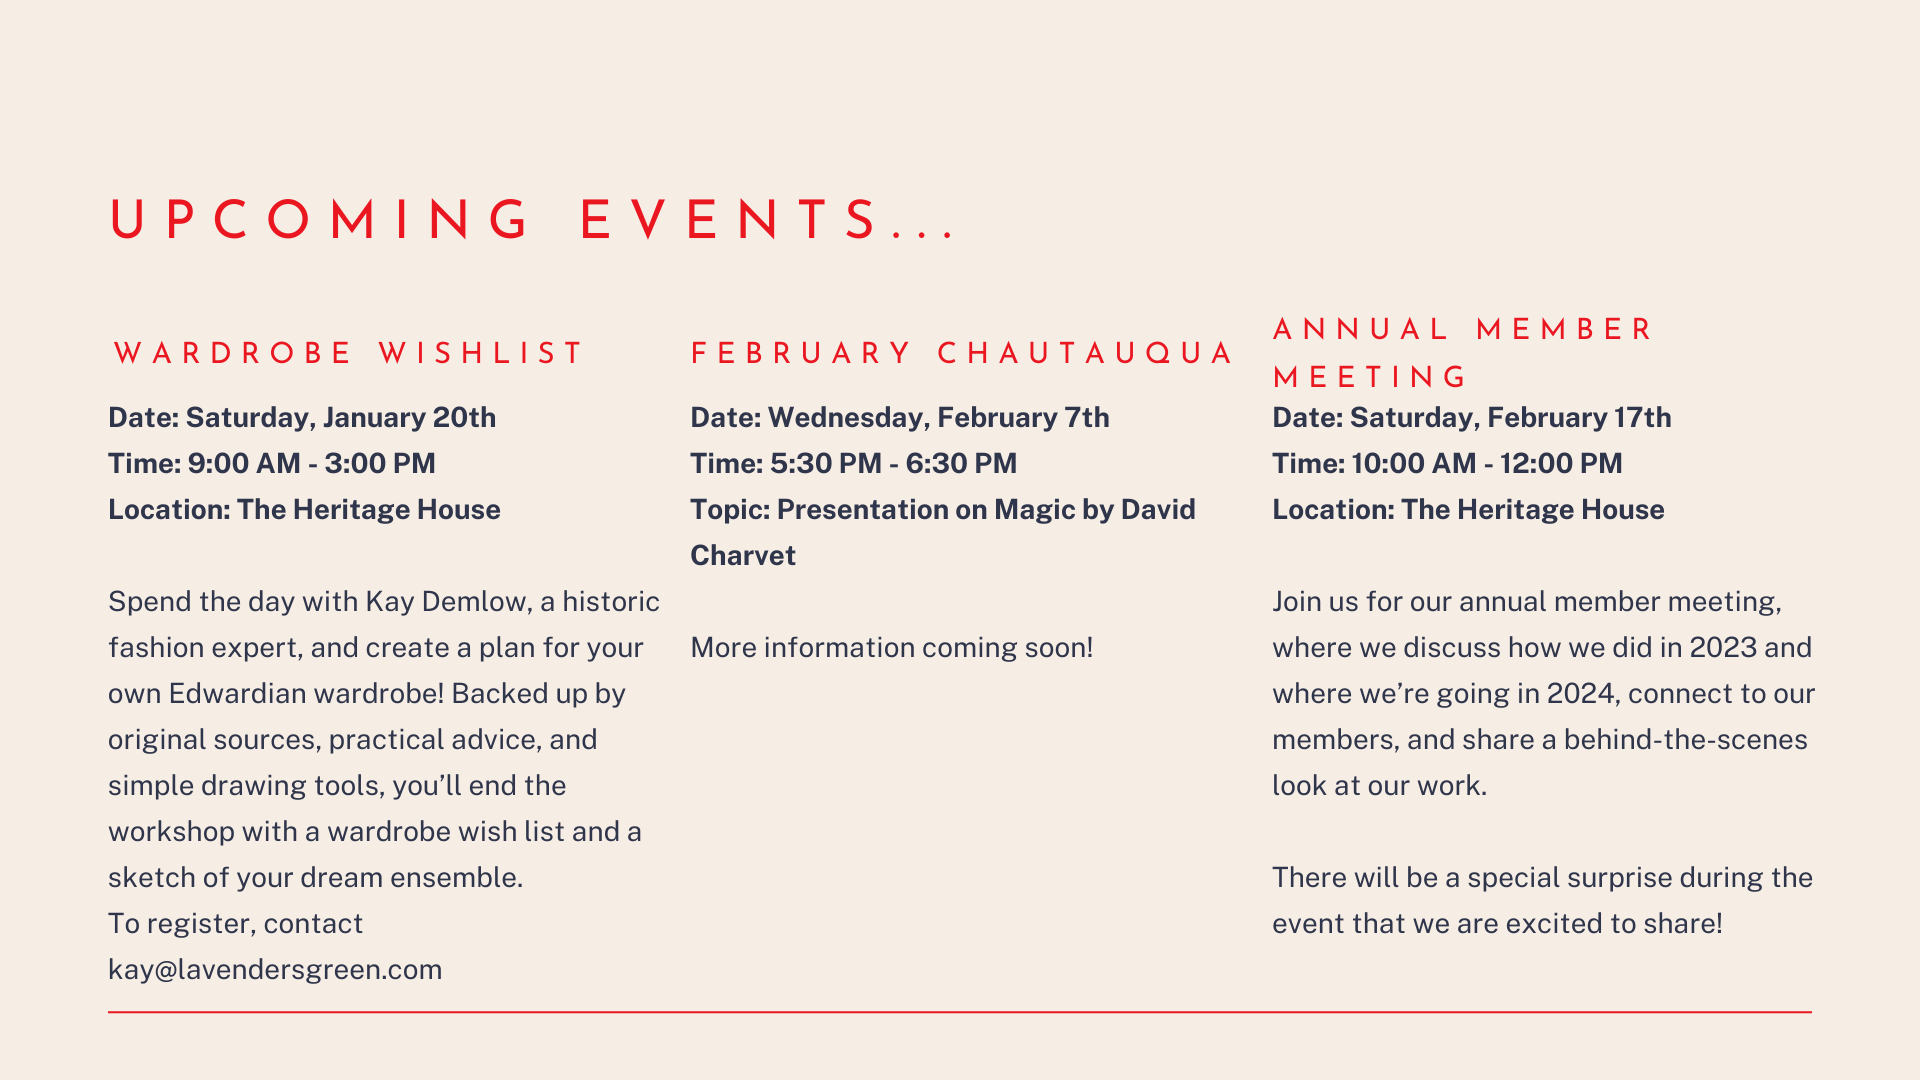 Upcoming Events include Wardrobe Wishlist, February Chautauqua, and Annual Member Meeting